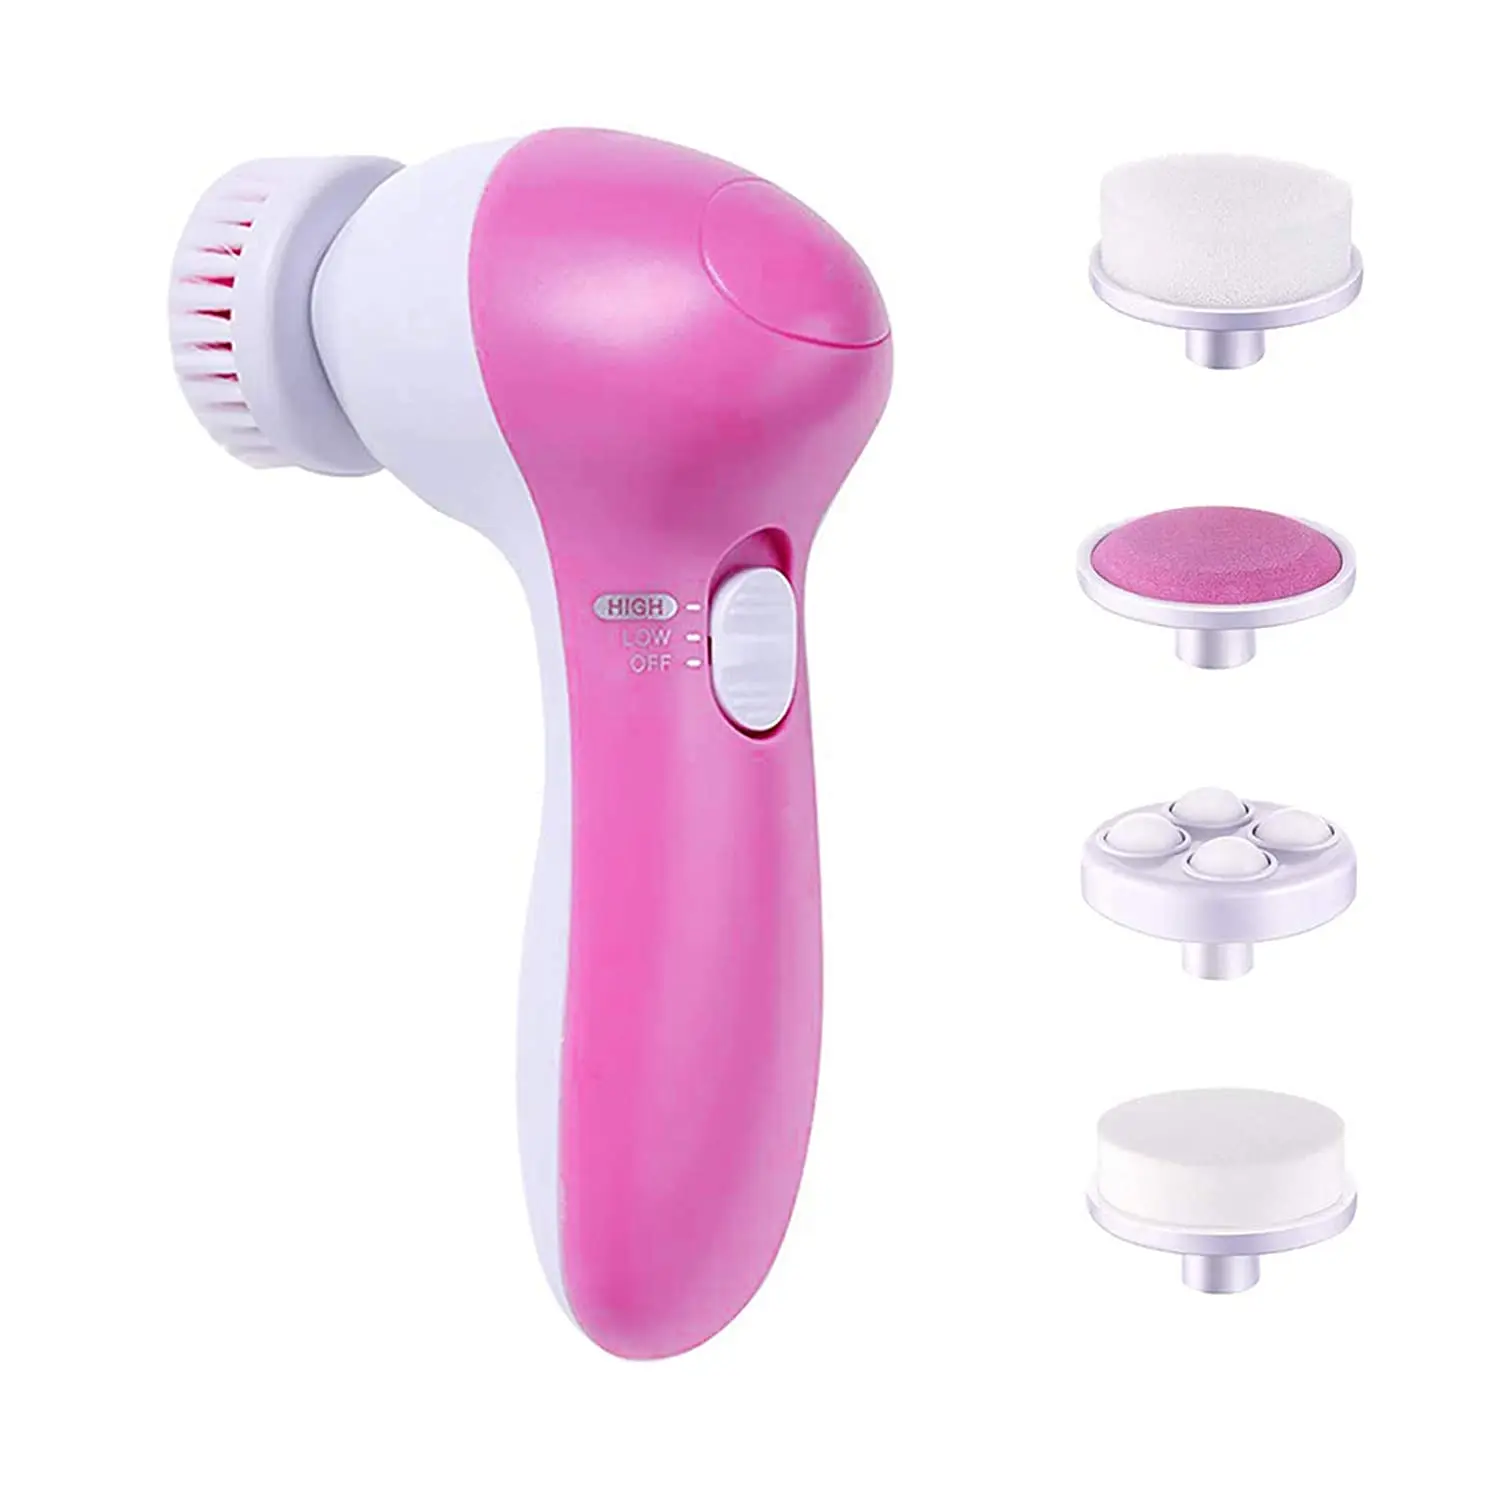 Facial Cleansing Brush Waterproof Face Spin Brush Set With 5 Brush Heads Gentle Exfoliating & Removing Blackhead Deep Cleansing rechargeable facial cleansing brush with 5 brush heads face scrubber face spin brush for exfoliating massage and deep cleansing